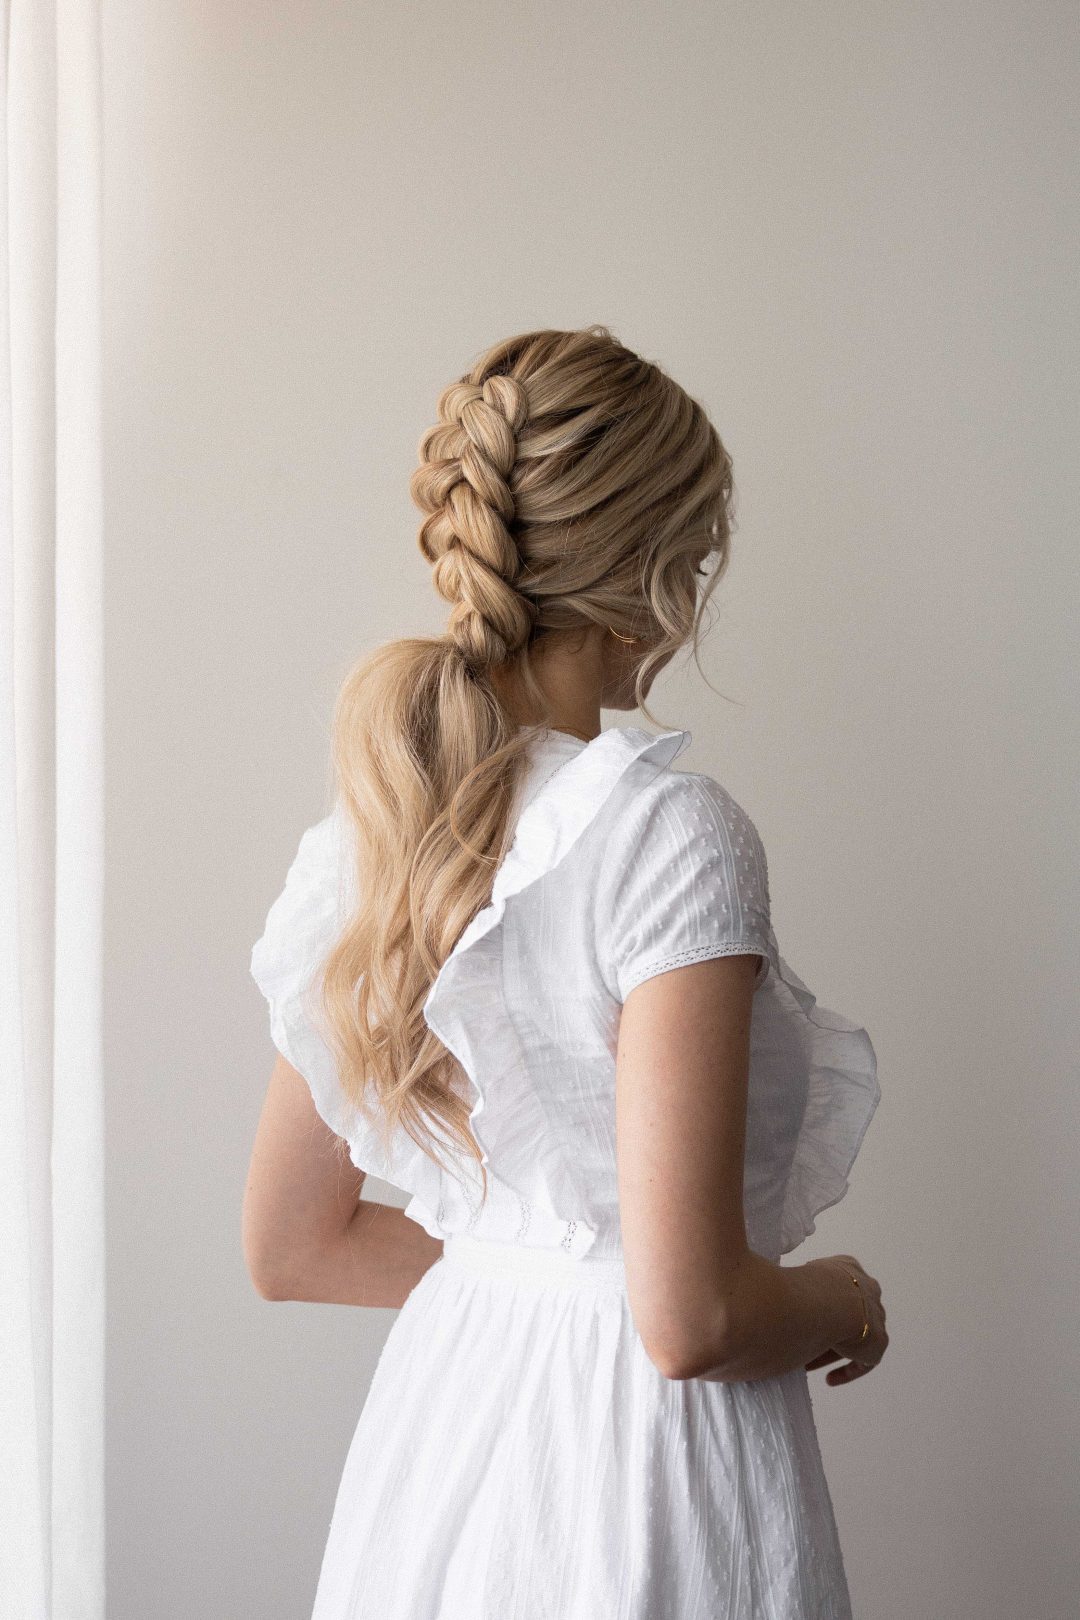 EASY BRAIDED PONYTAIL HAIRSTYLE SPRING 2021 Wedding, Bridal, Prom hairstyles